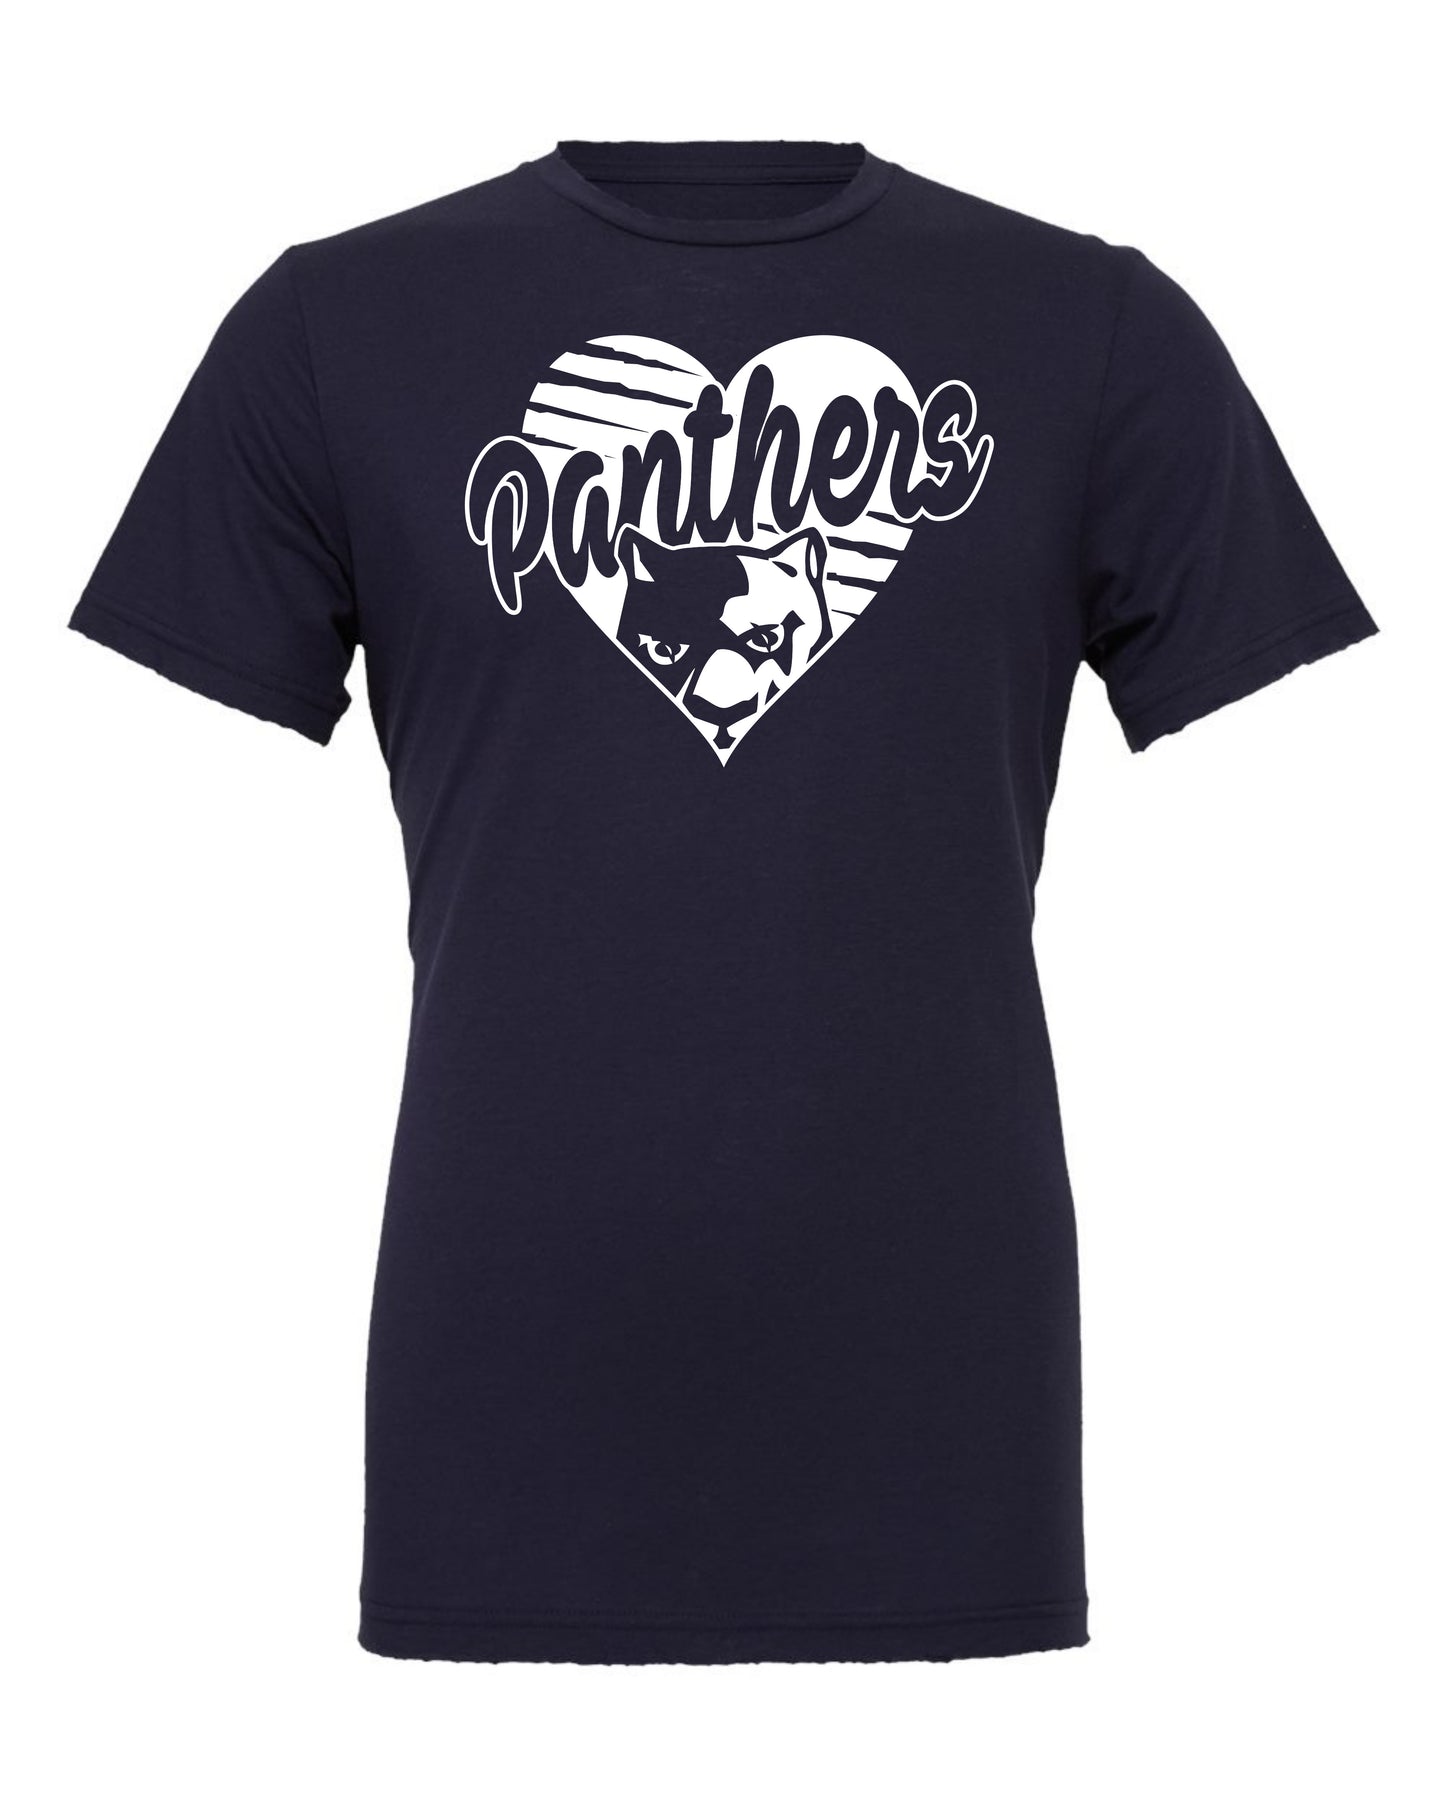 Panthers Heart - Adult Tee